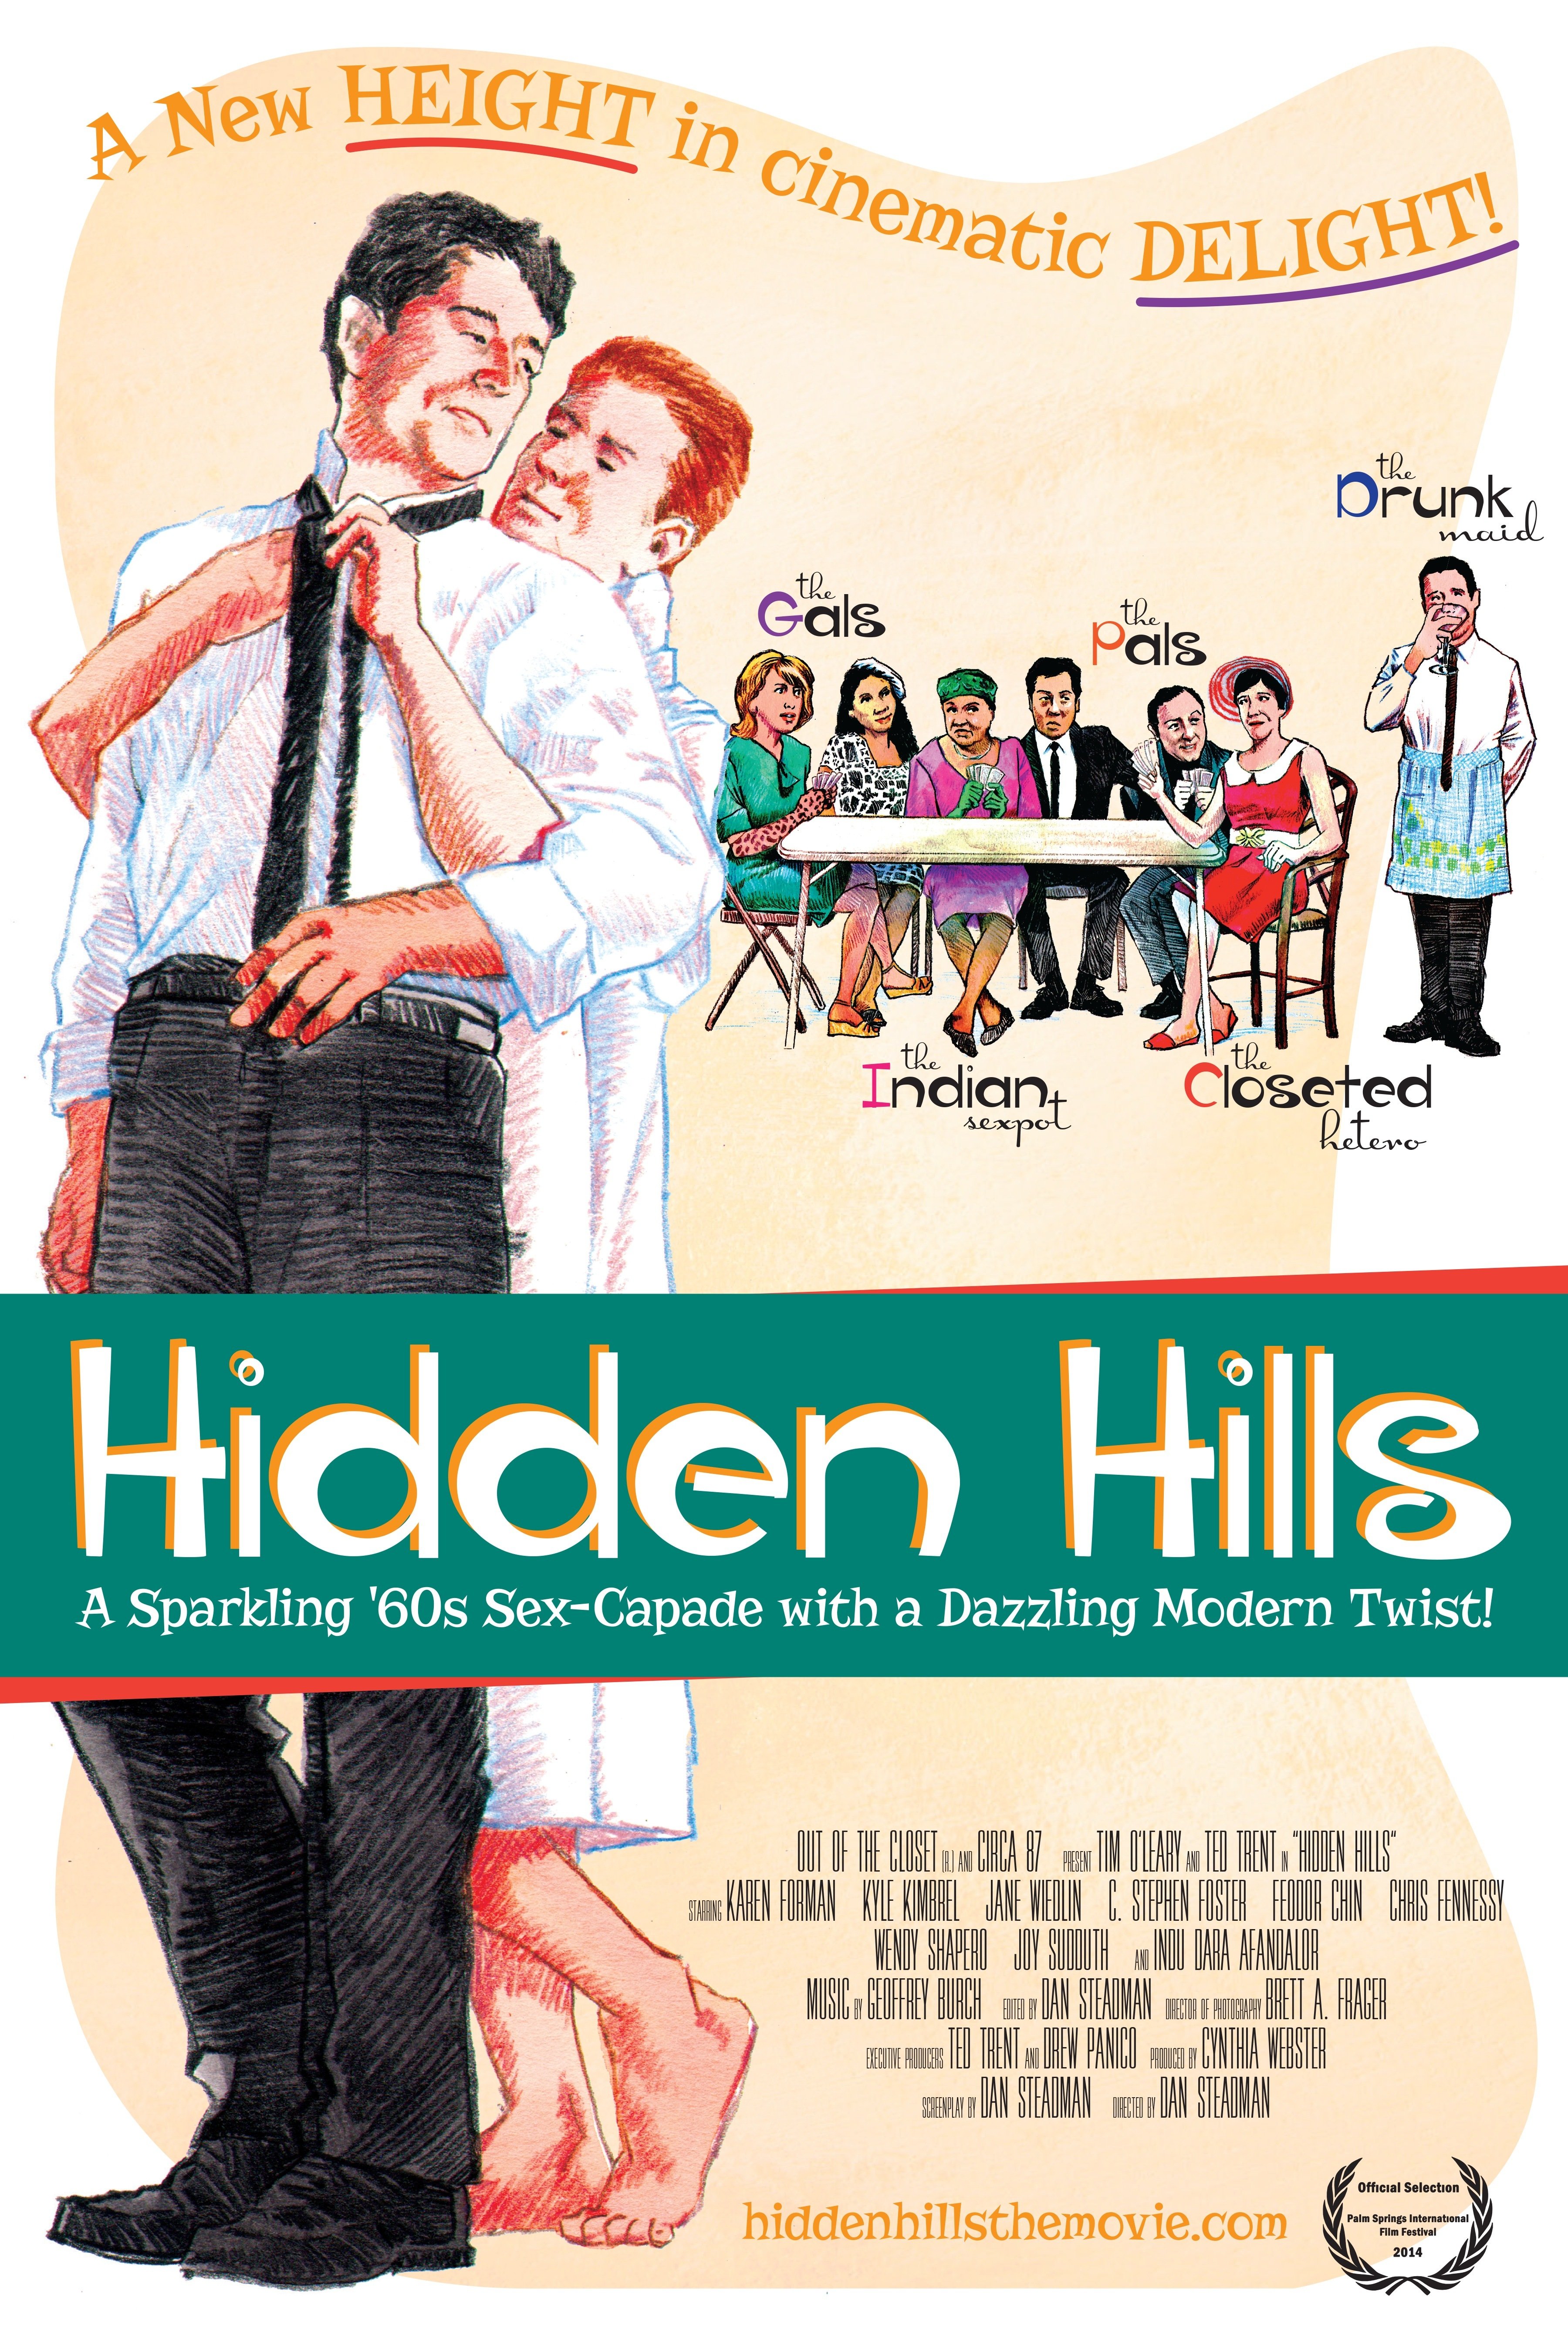 Official Poster for the 2014 film HIDDEN HILLS, premiering at the Palm Springs International Film Festival